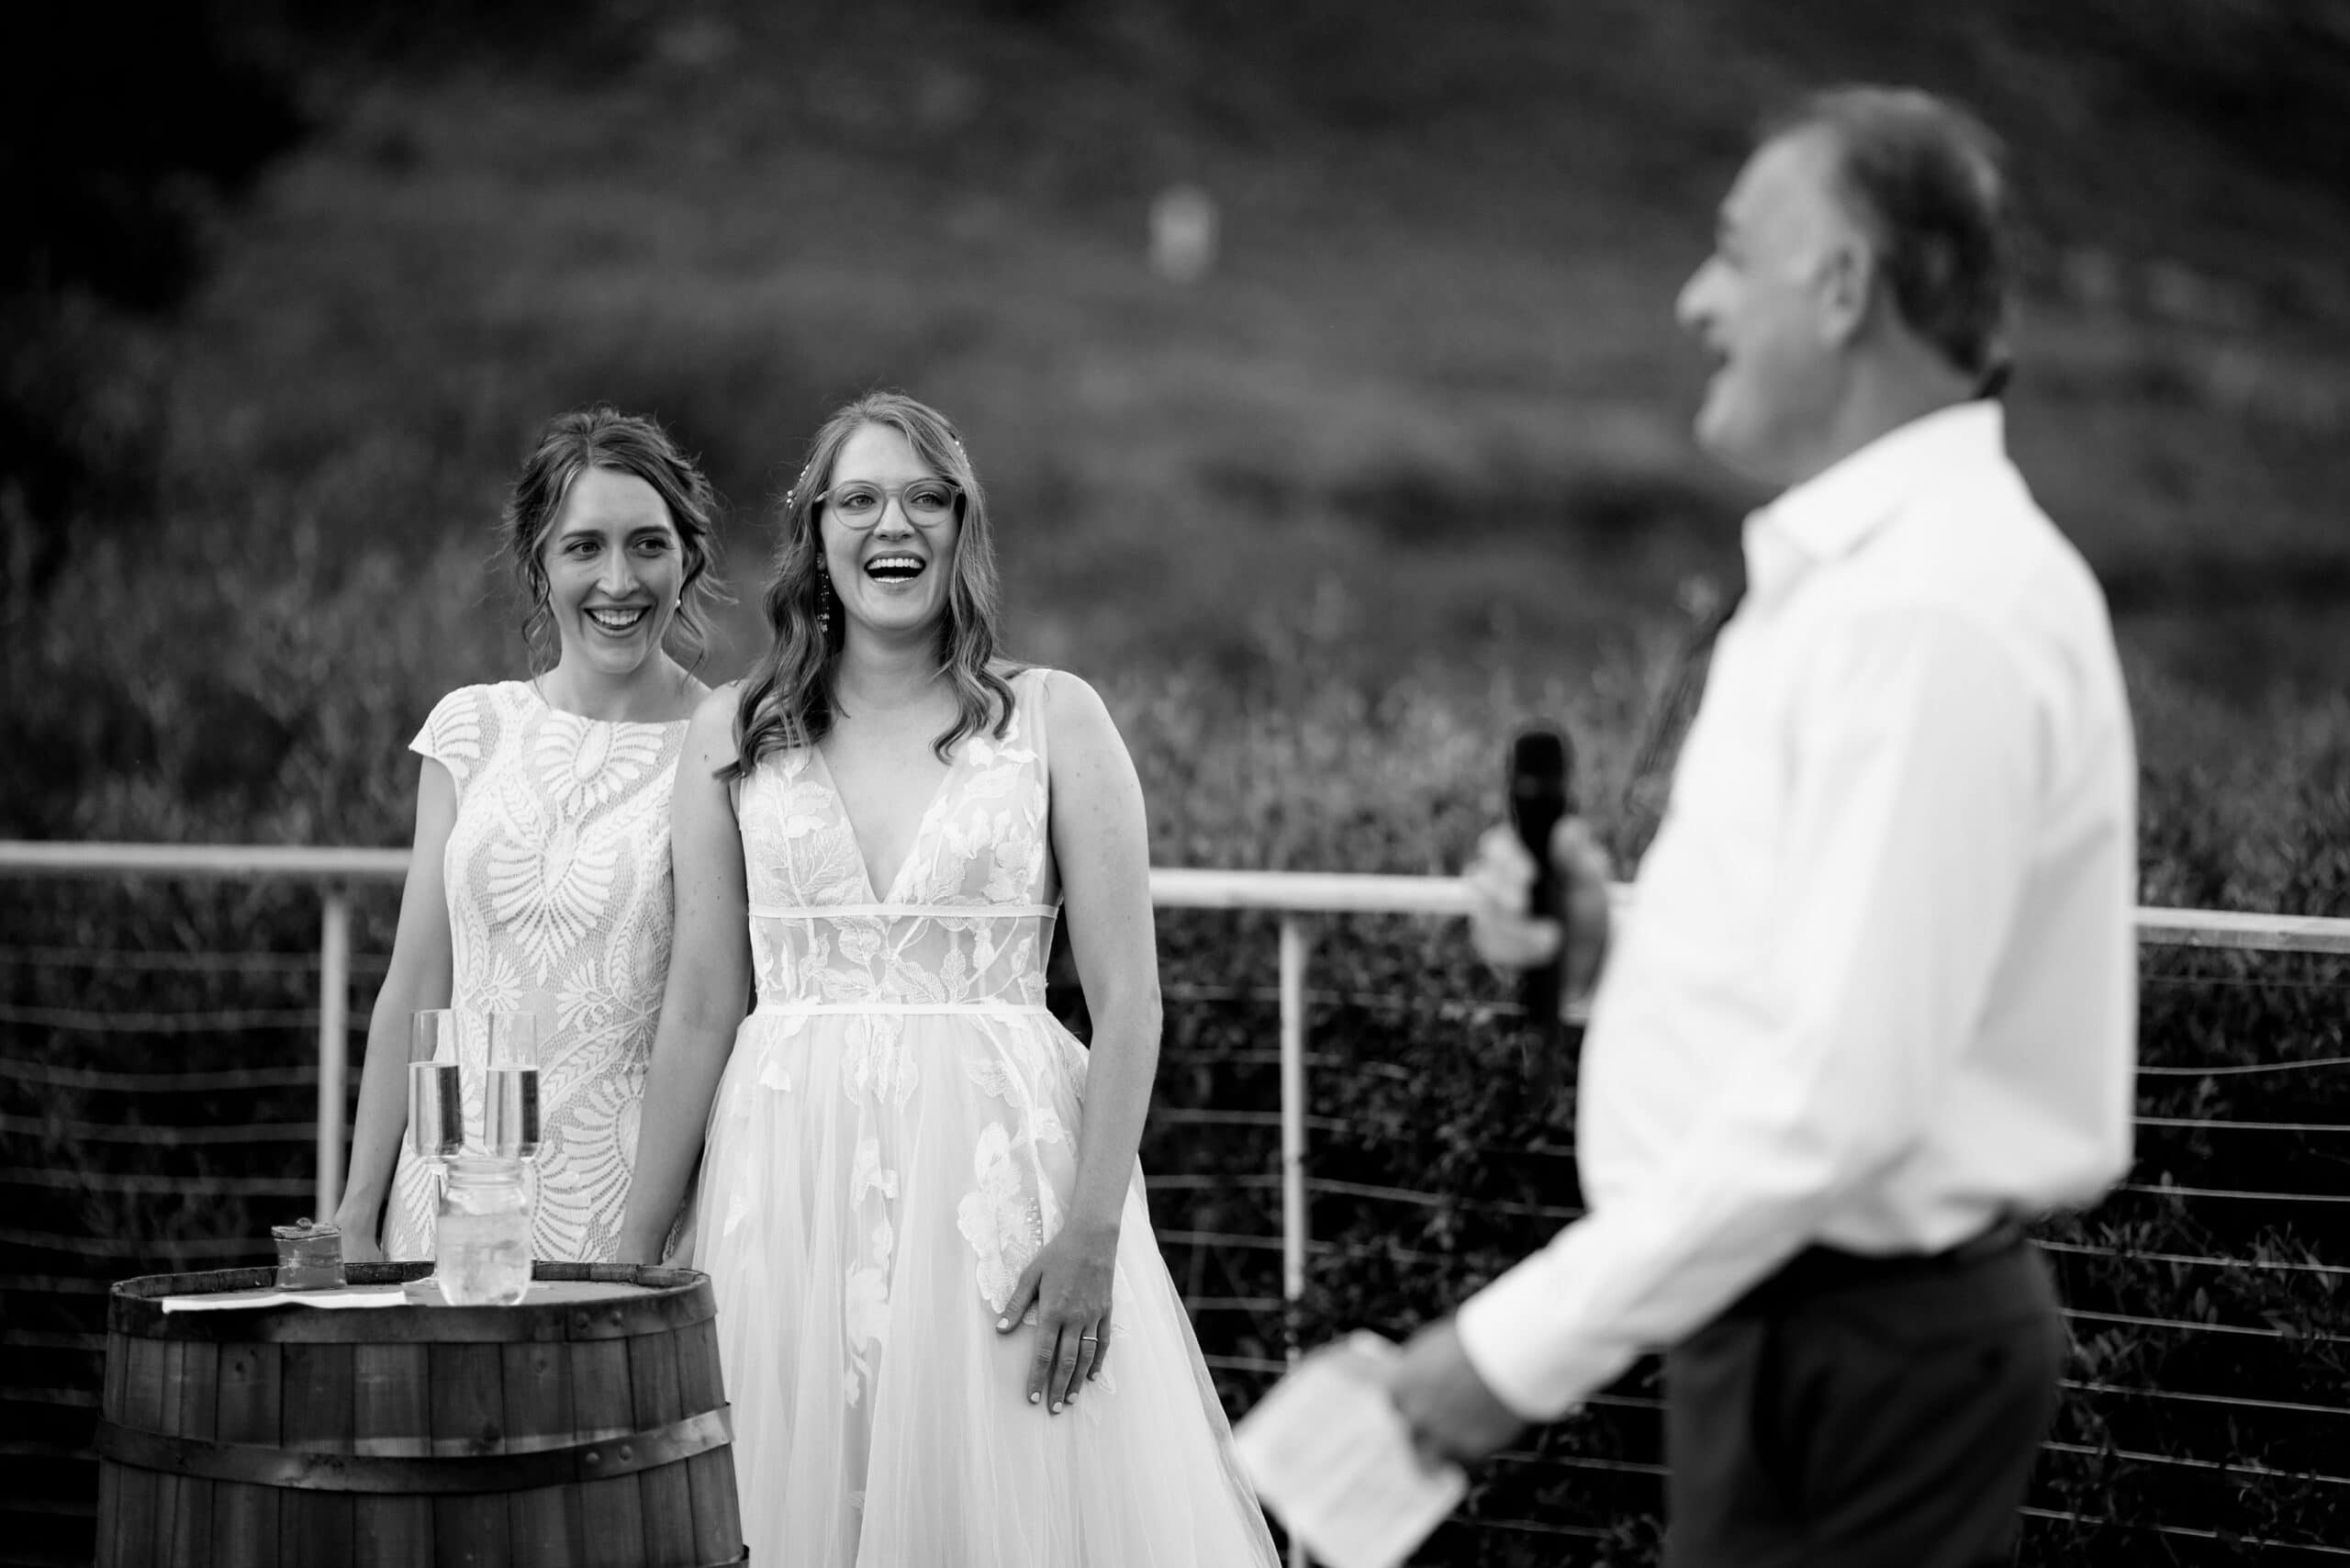 The brides laugh as a father of the bride gives a toast